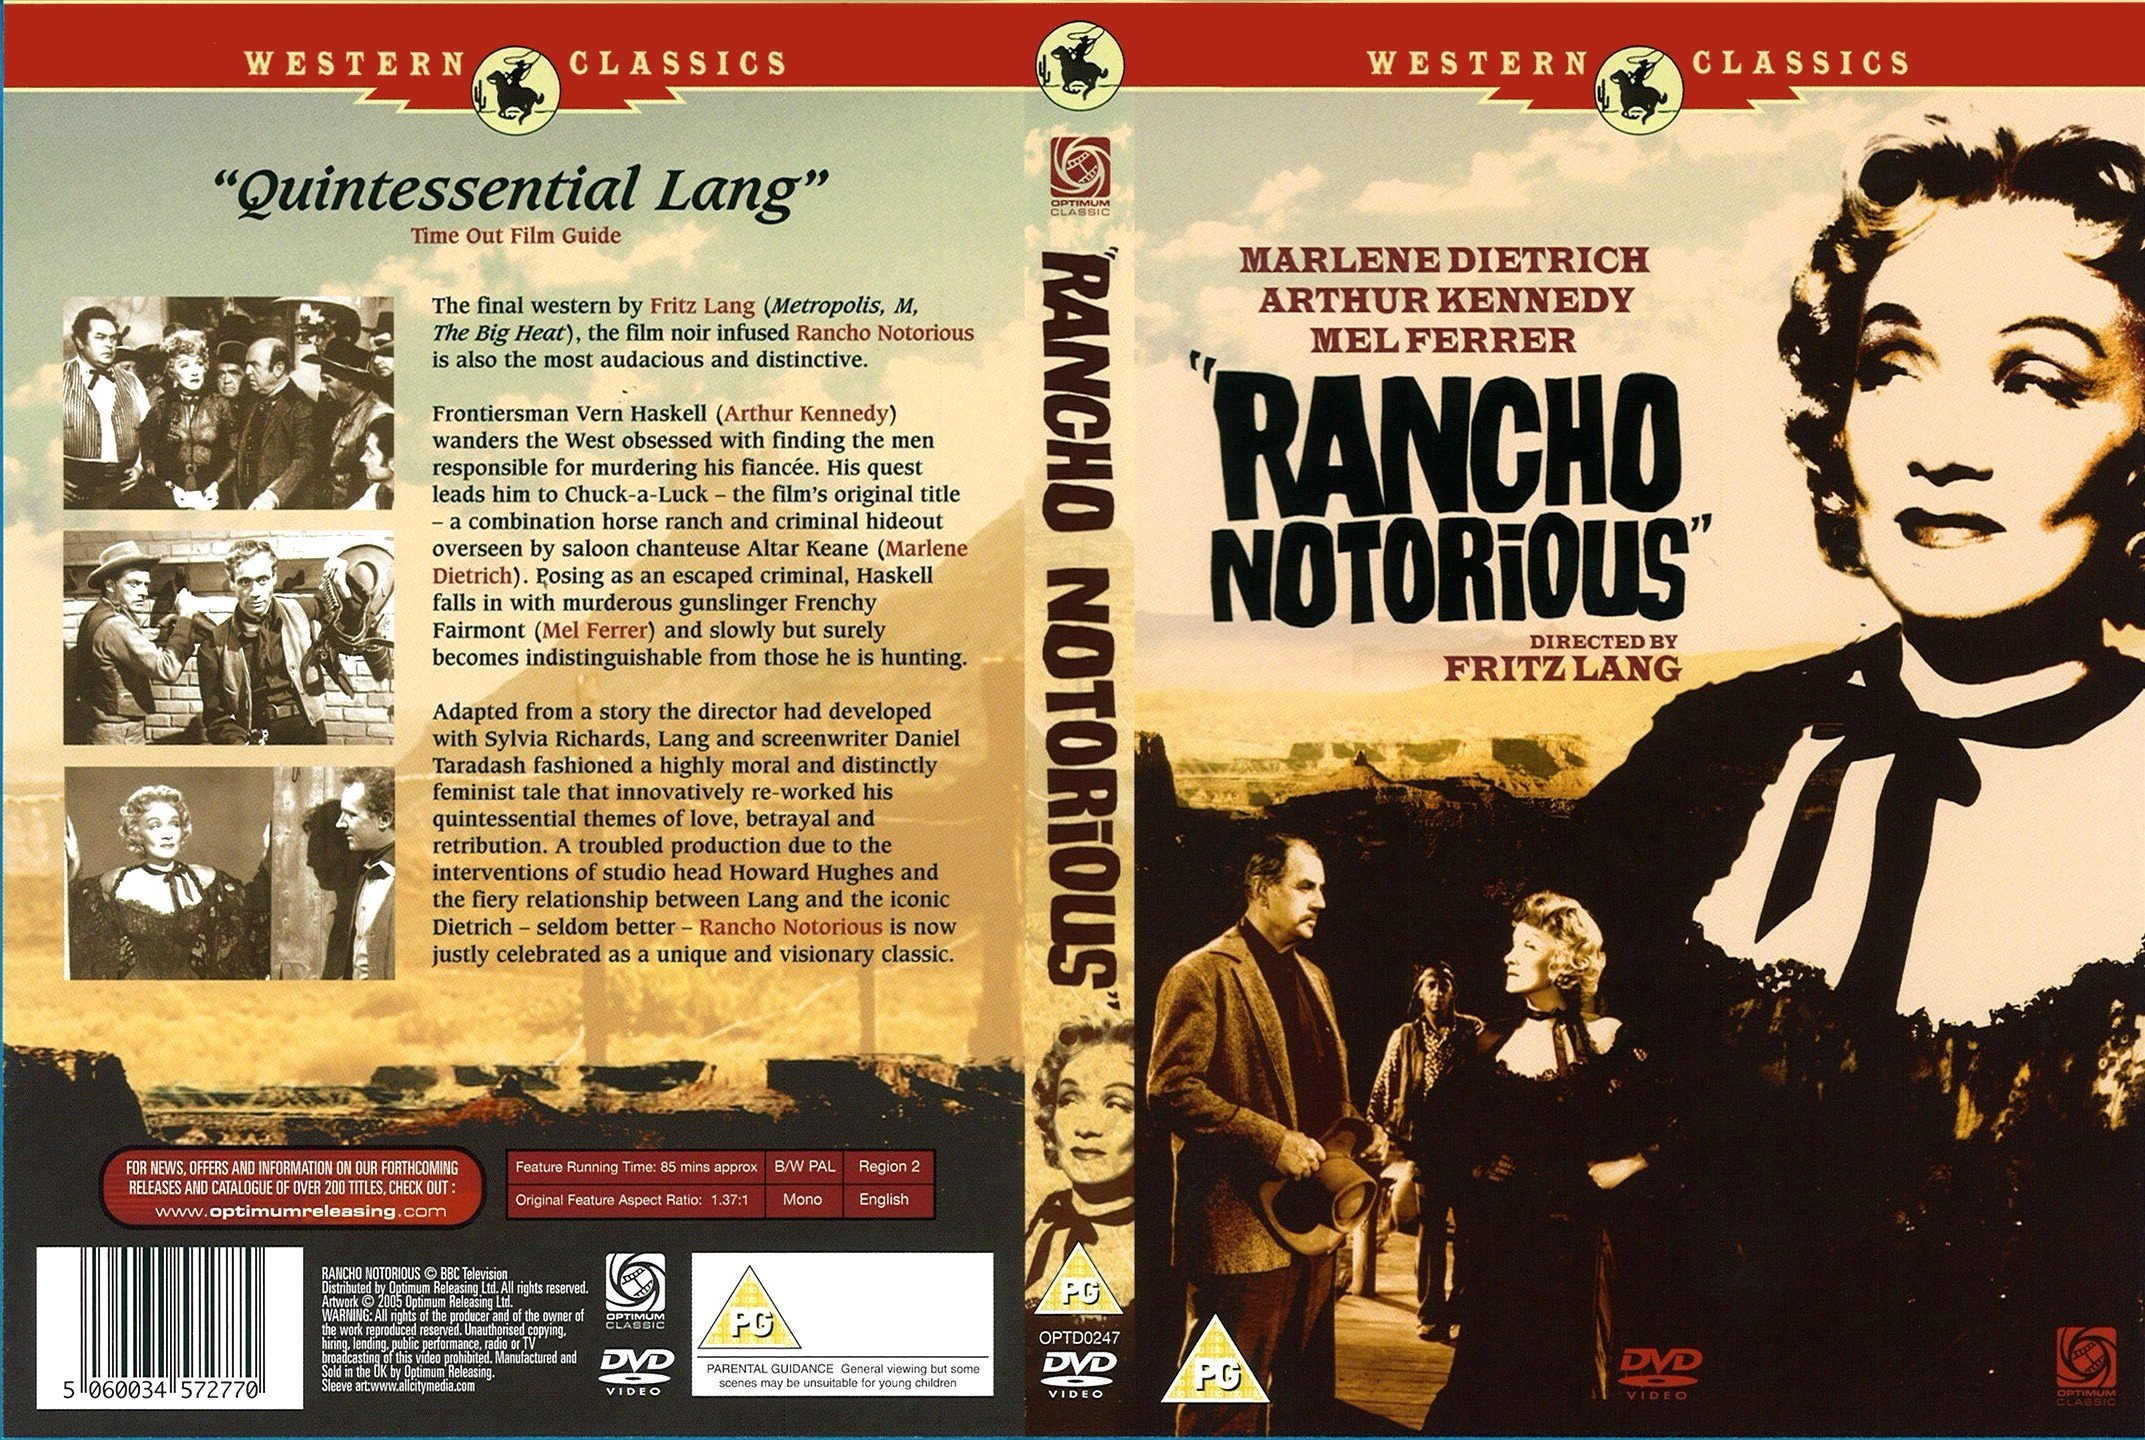 Jaquette DVD Rancho notorious